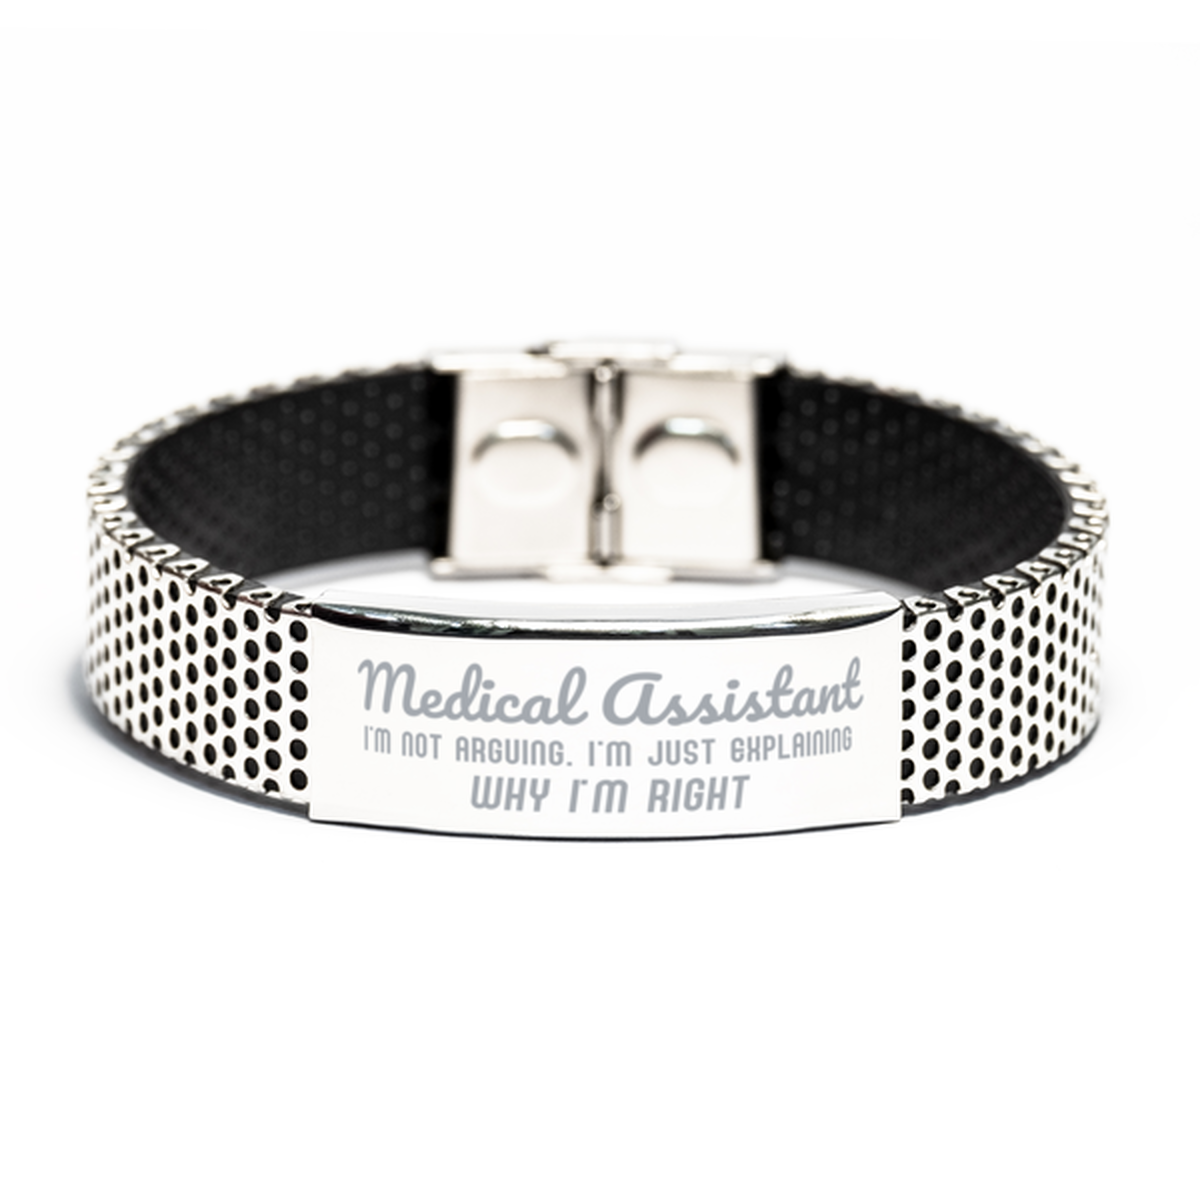 Medical Assistant I'm not Arguing. I'm Just Explaining Why I'm RIGHT Stainless Steel Bracelet, Funny Saying Quote Medical Assistant Gifts For Medical Assistant Graduation Birthday Christmas Gifts for Men Women Coworker